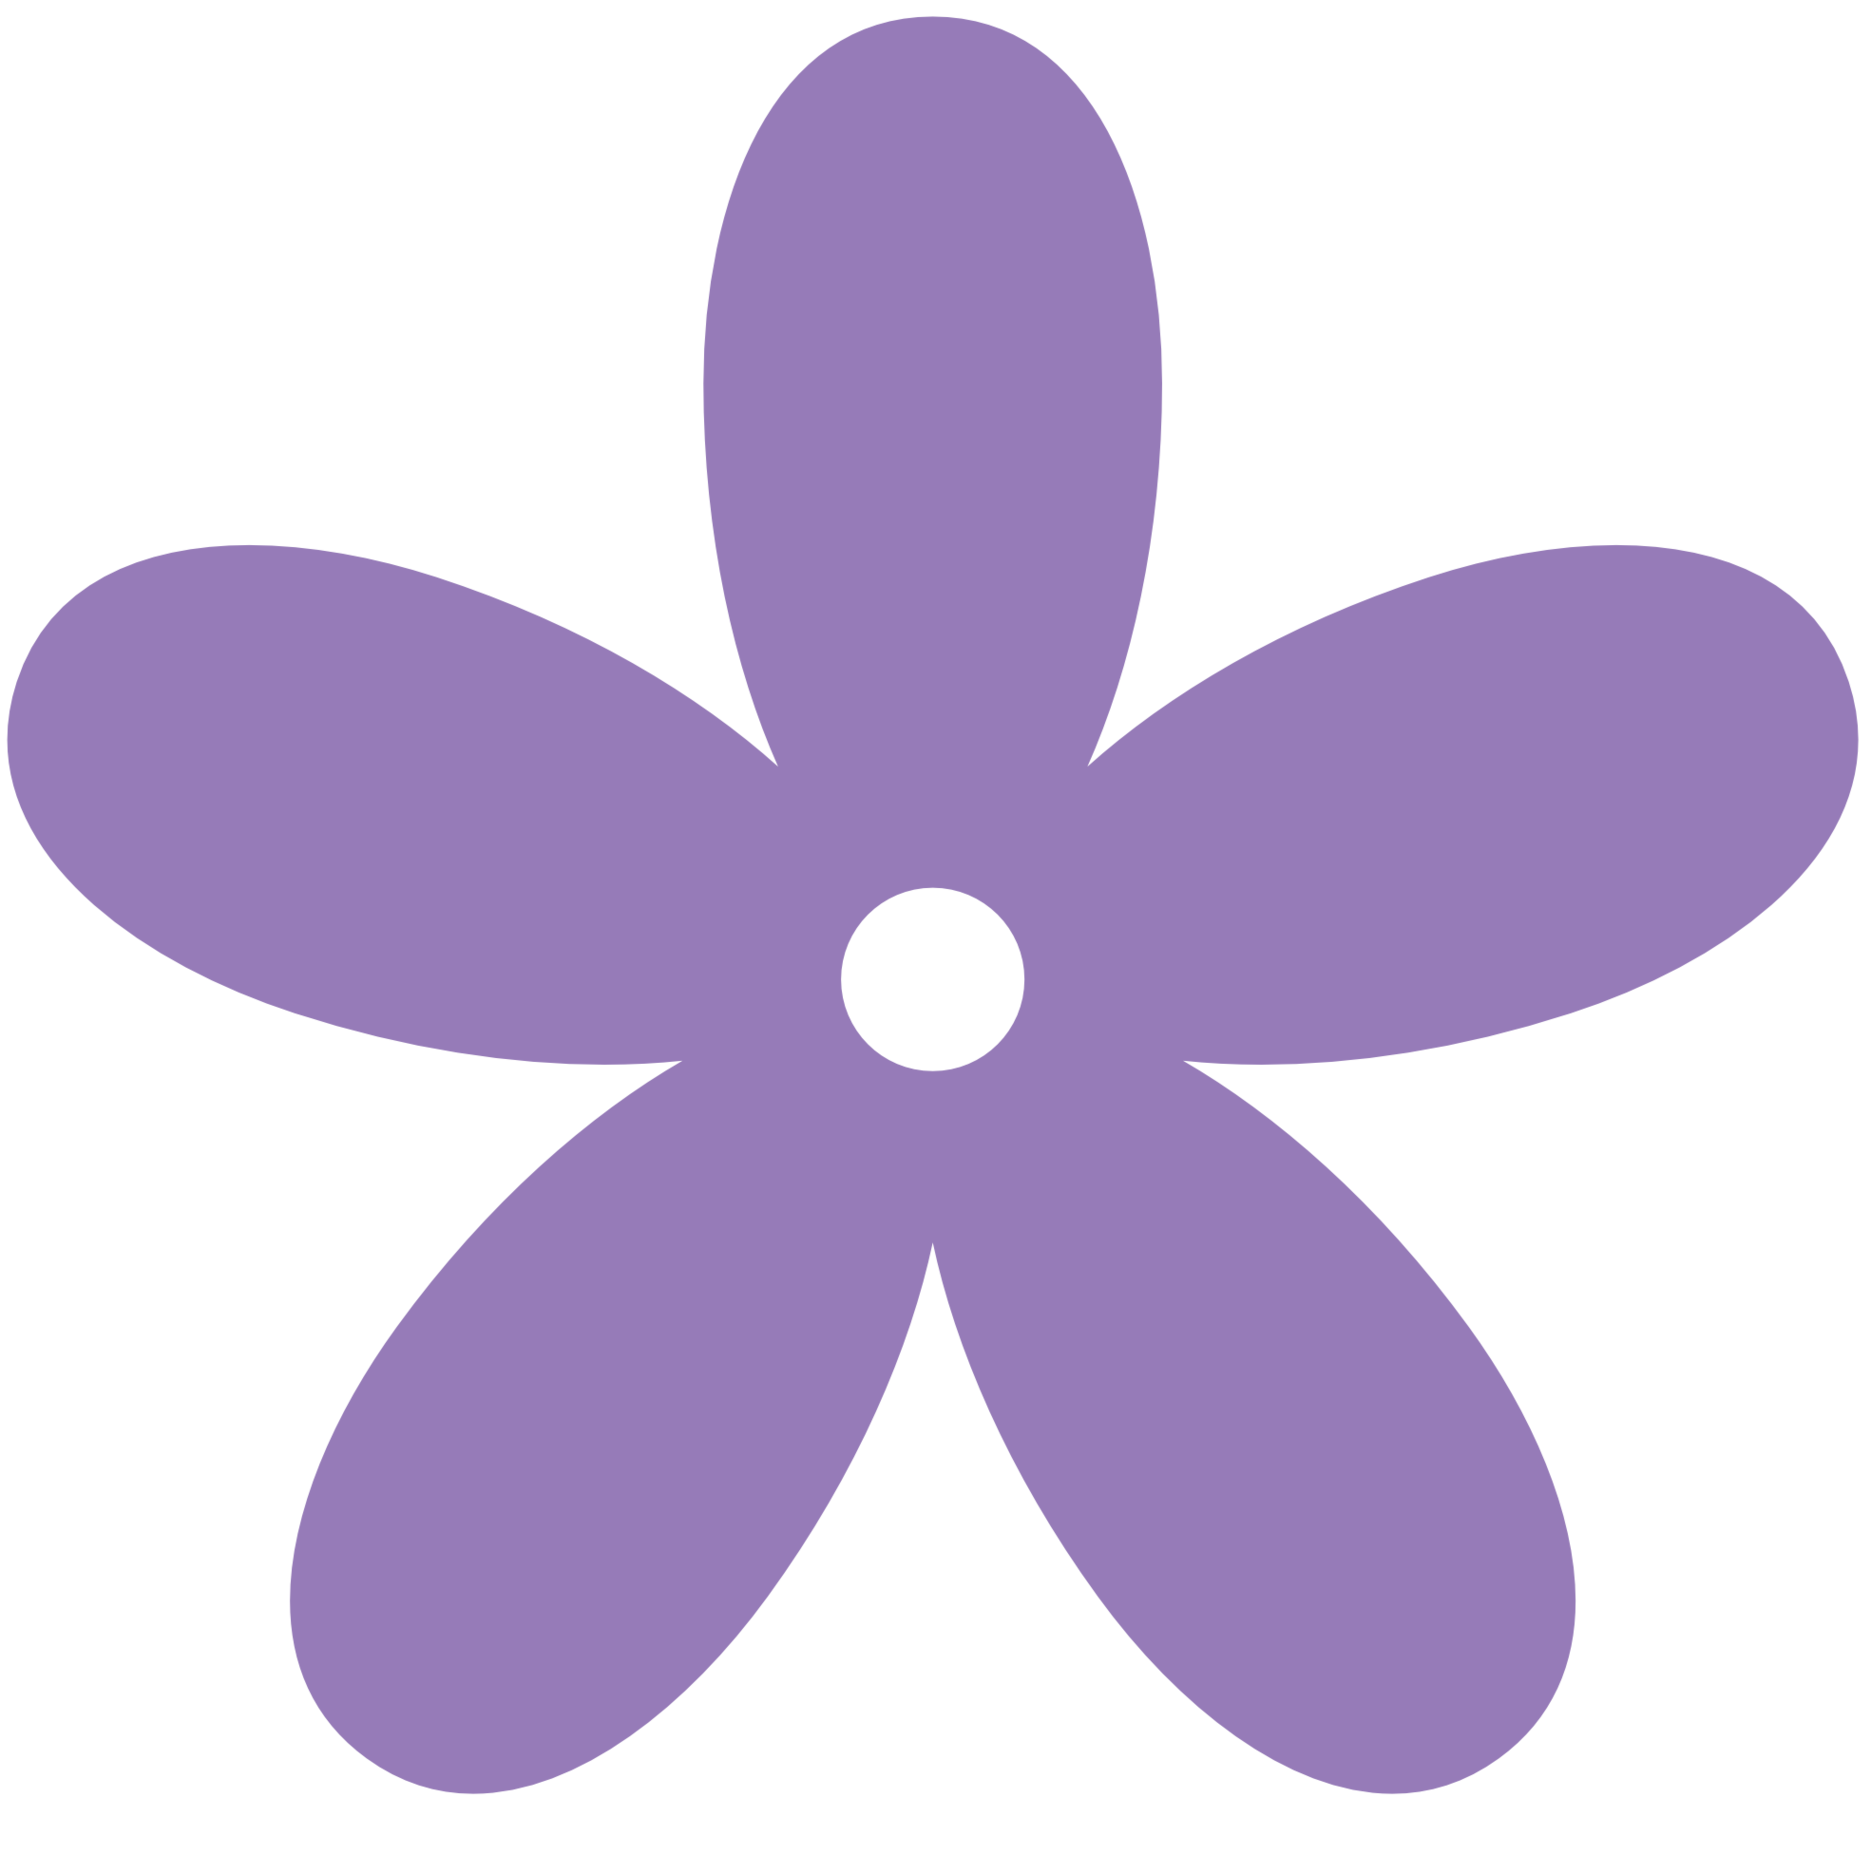 Purple Flowers Cartoon Clipart - Free to use Clip Art Resource ...